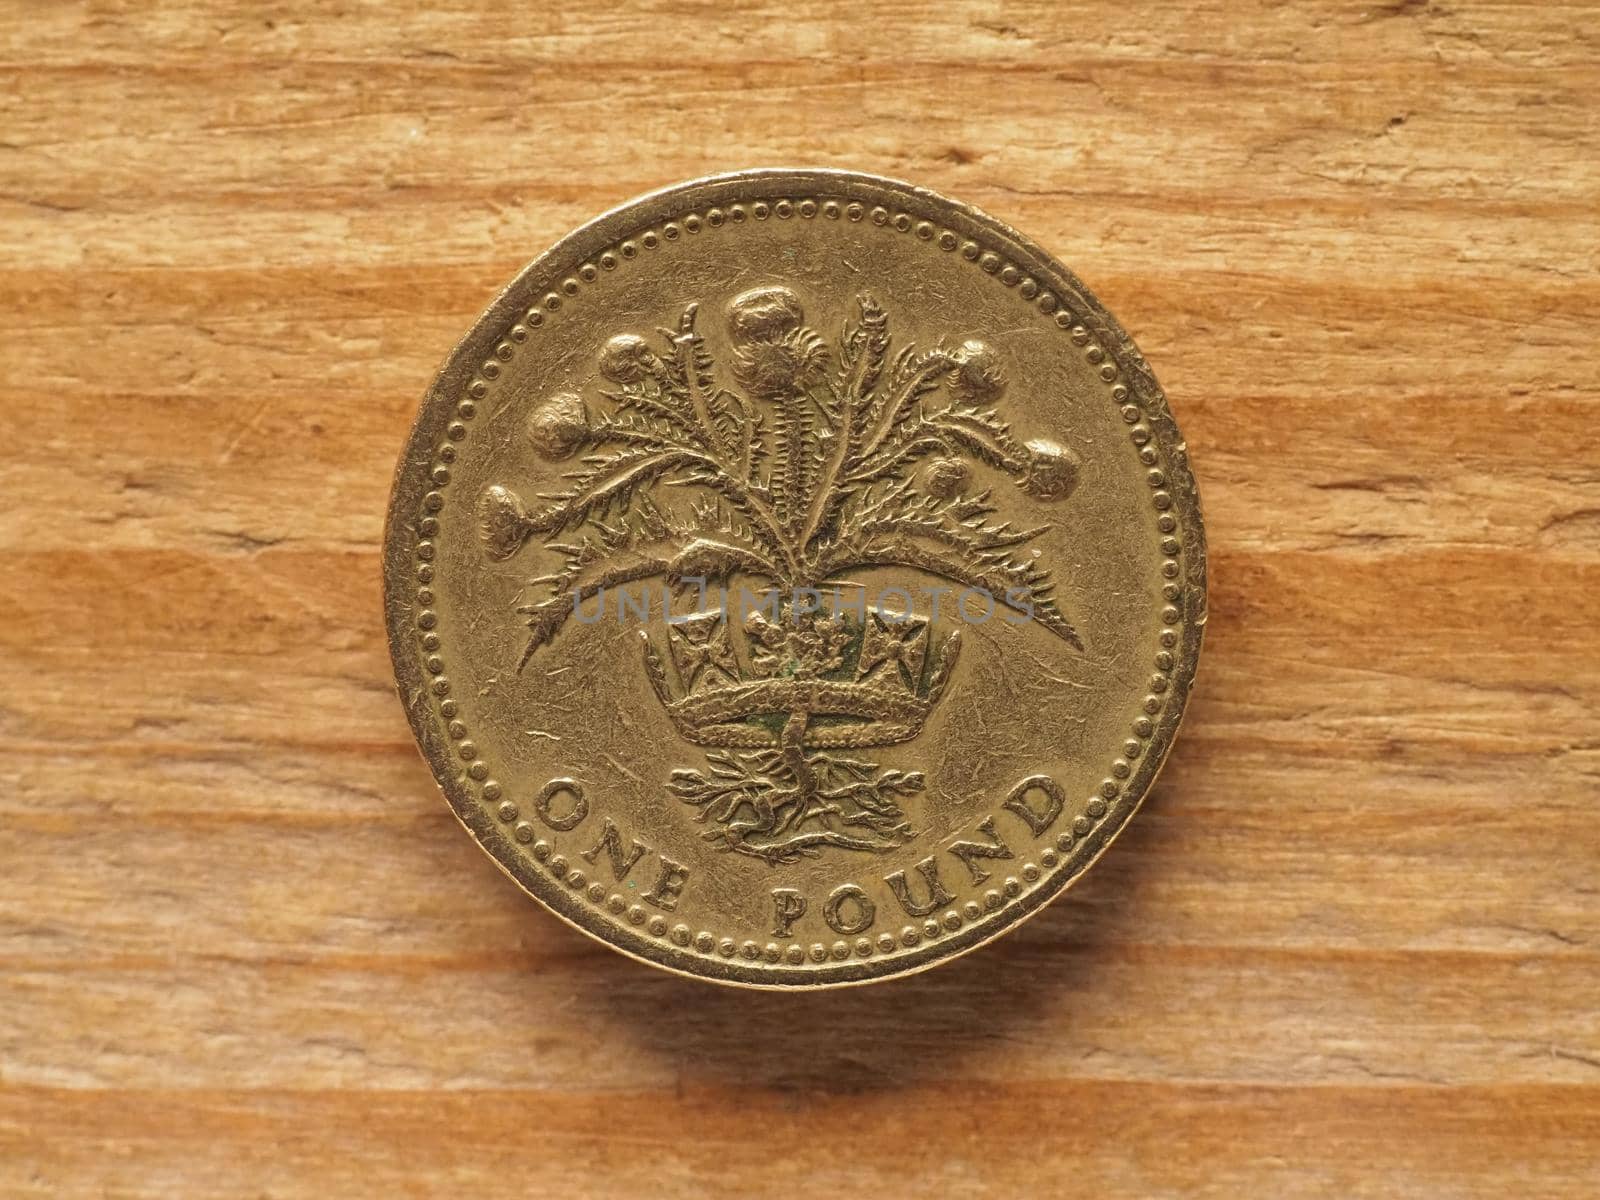 1 Pound coin, reverse side showing Thistle and diadem representing Scotland, currency of the UK by claudiodivizia